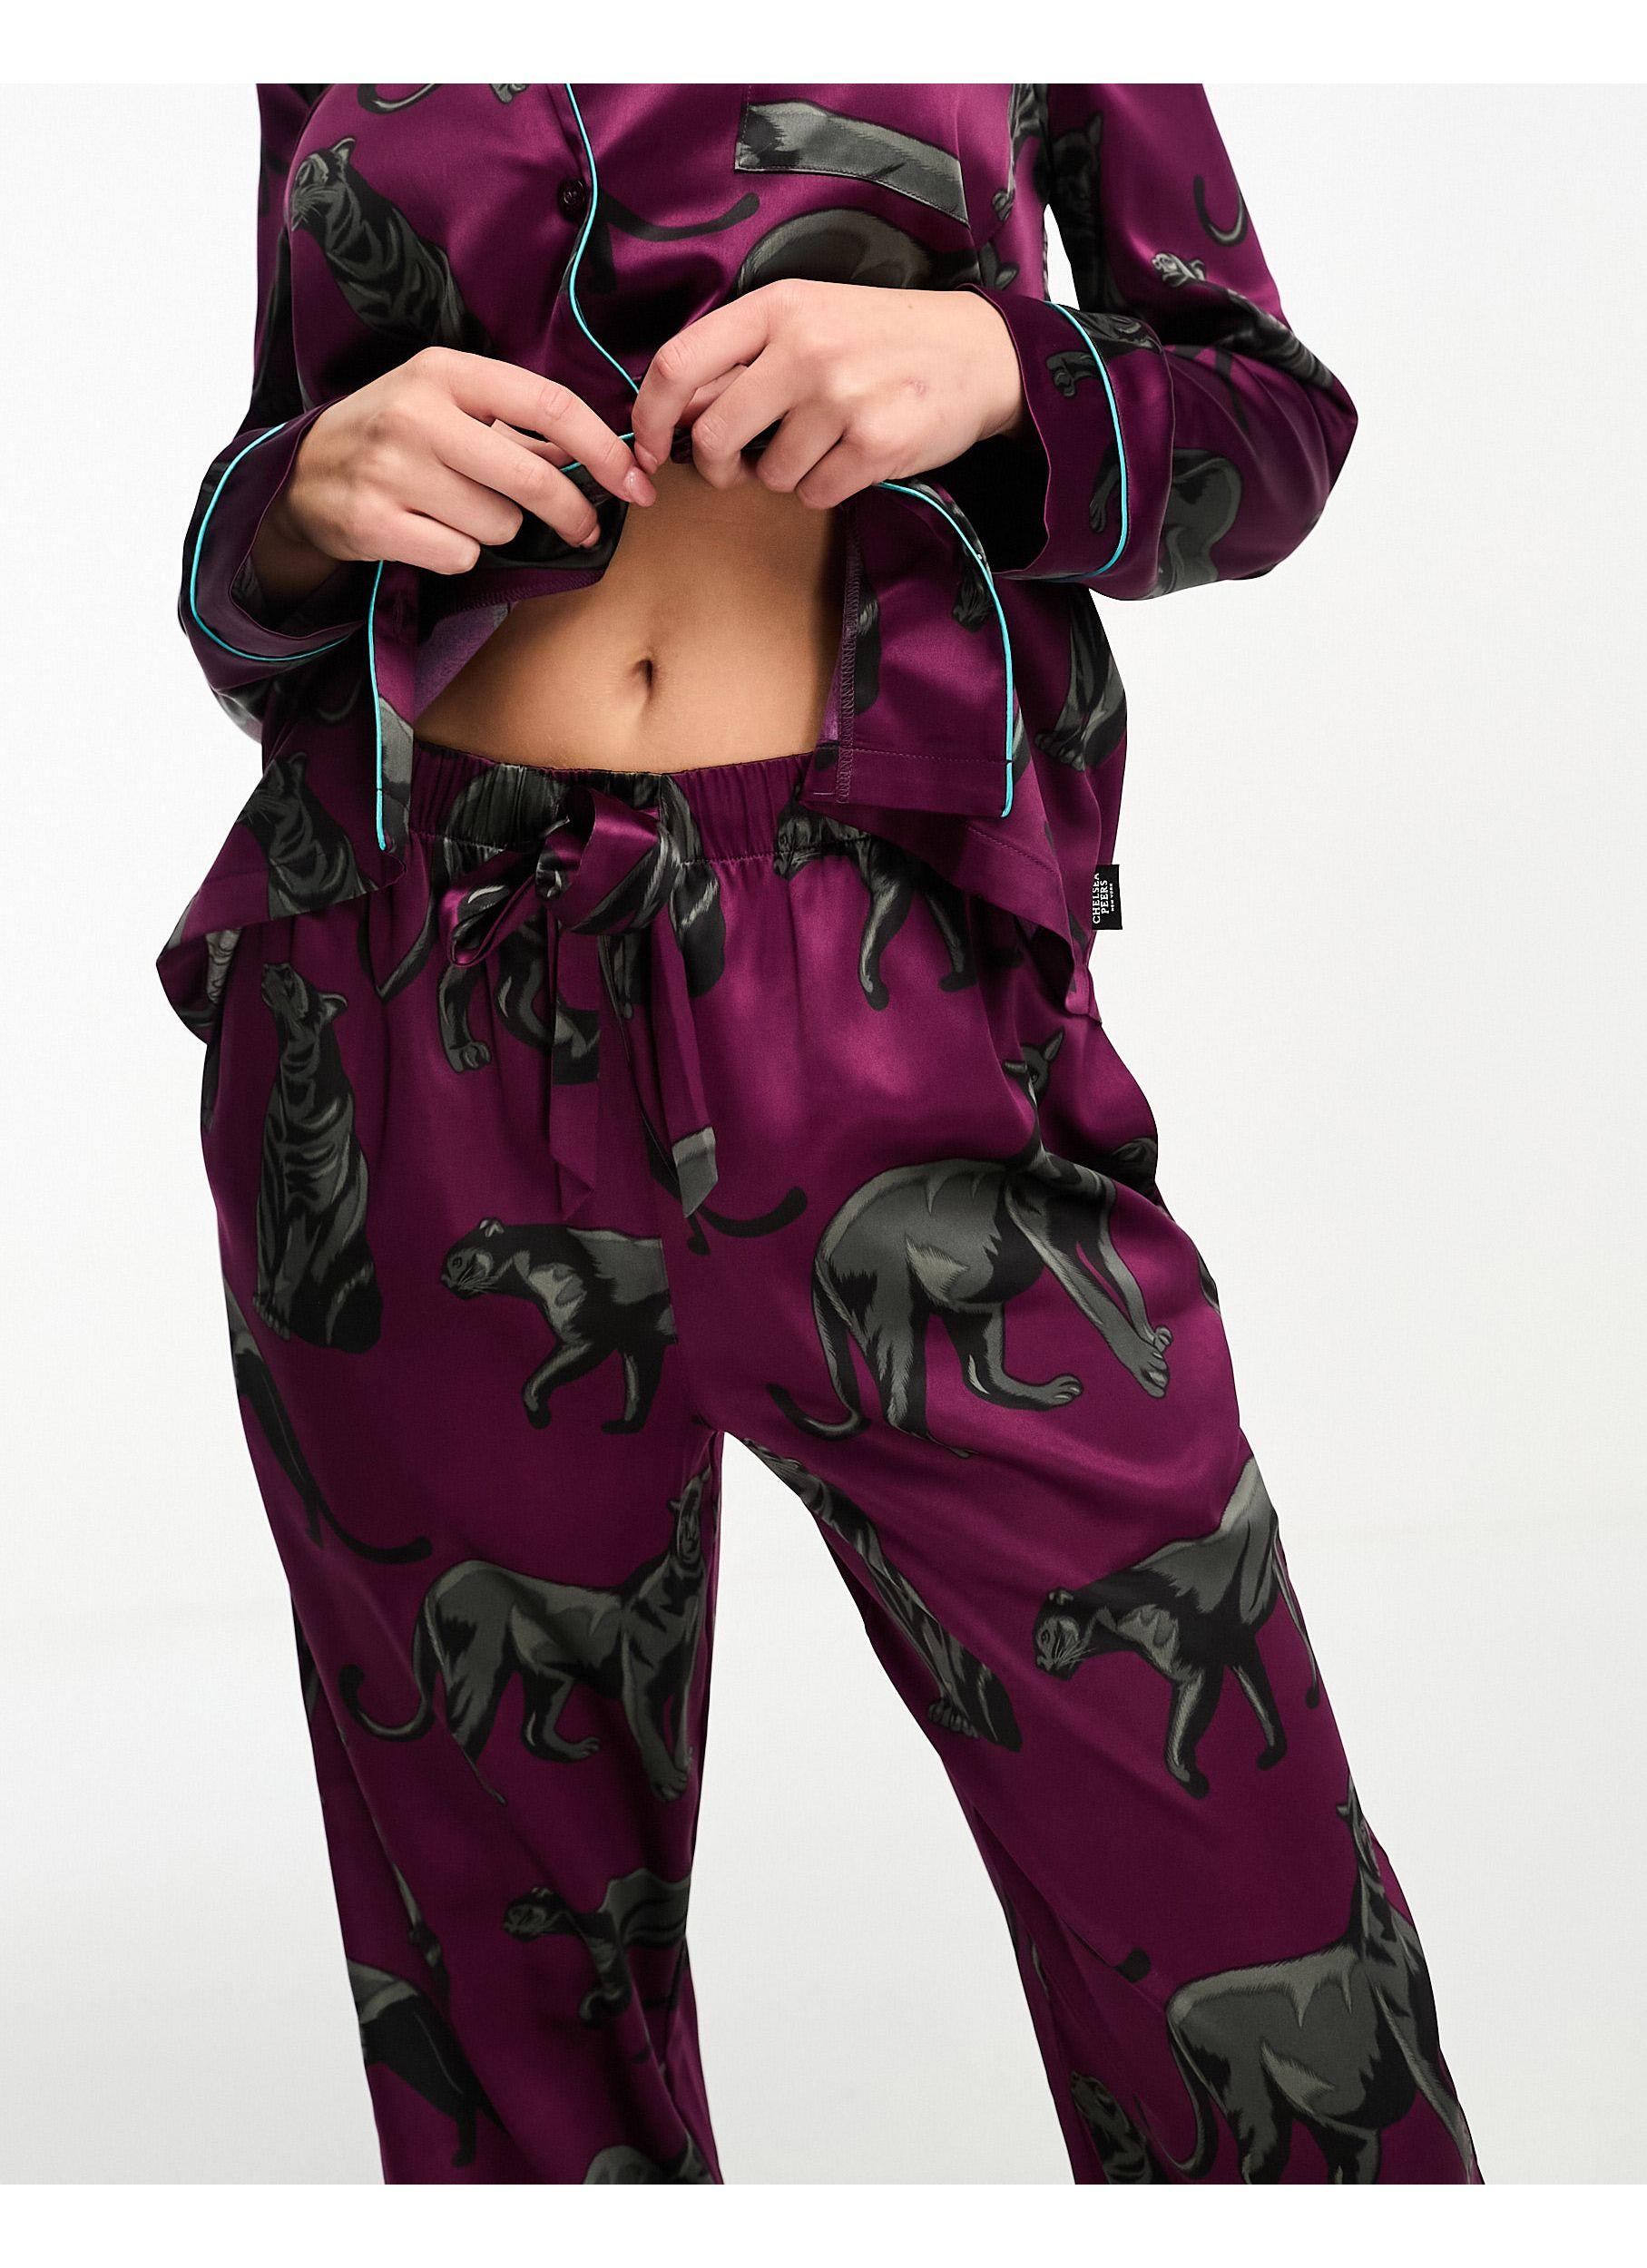 Chelsea Peers Exclusive Satin Panther Print Button Top And Pants Pajama Set  in Red